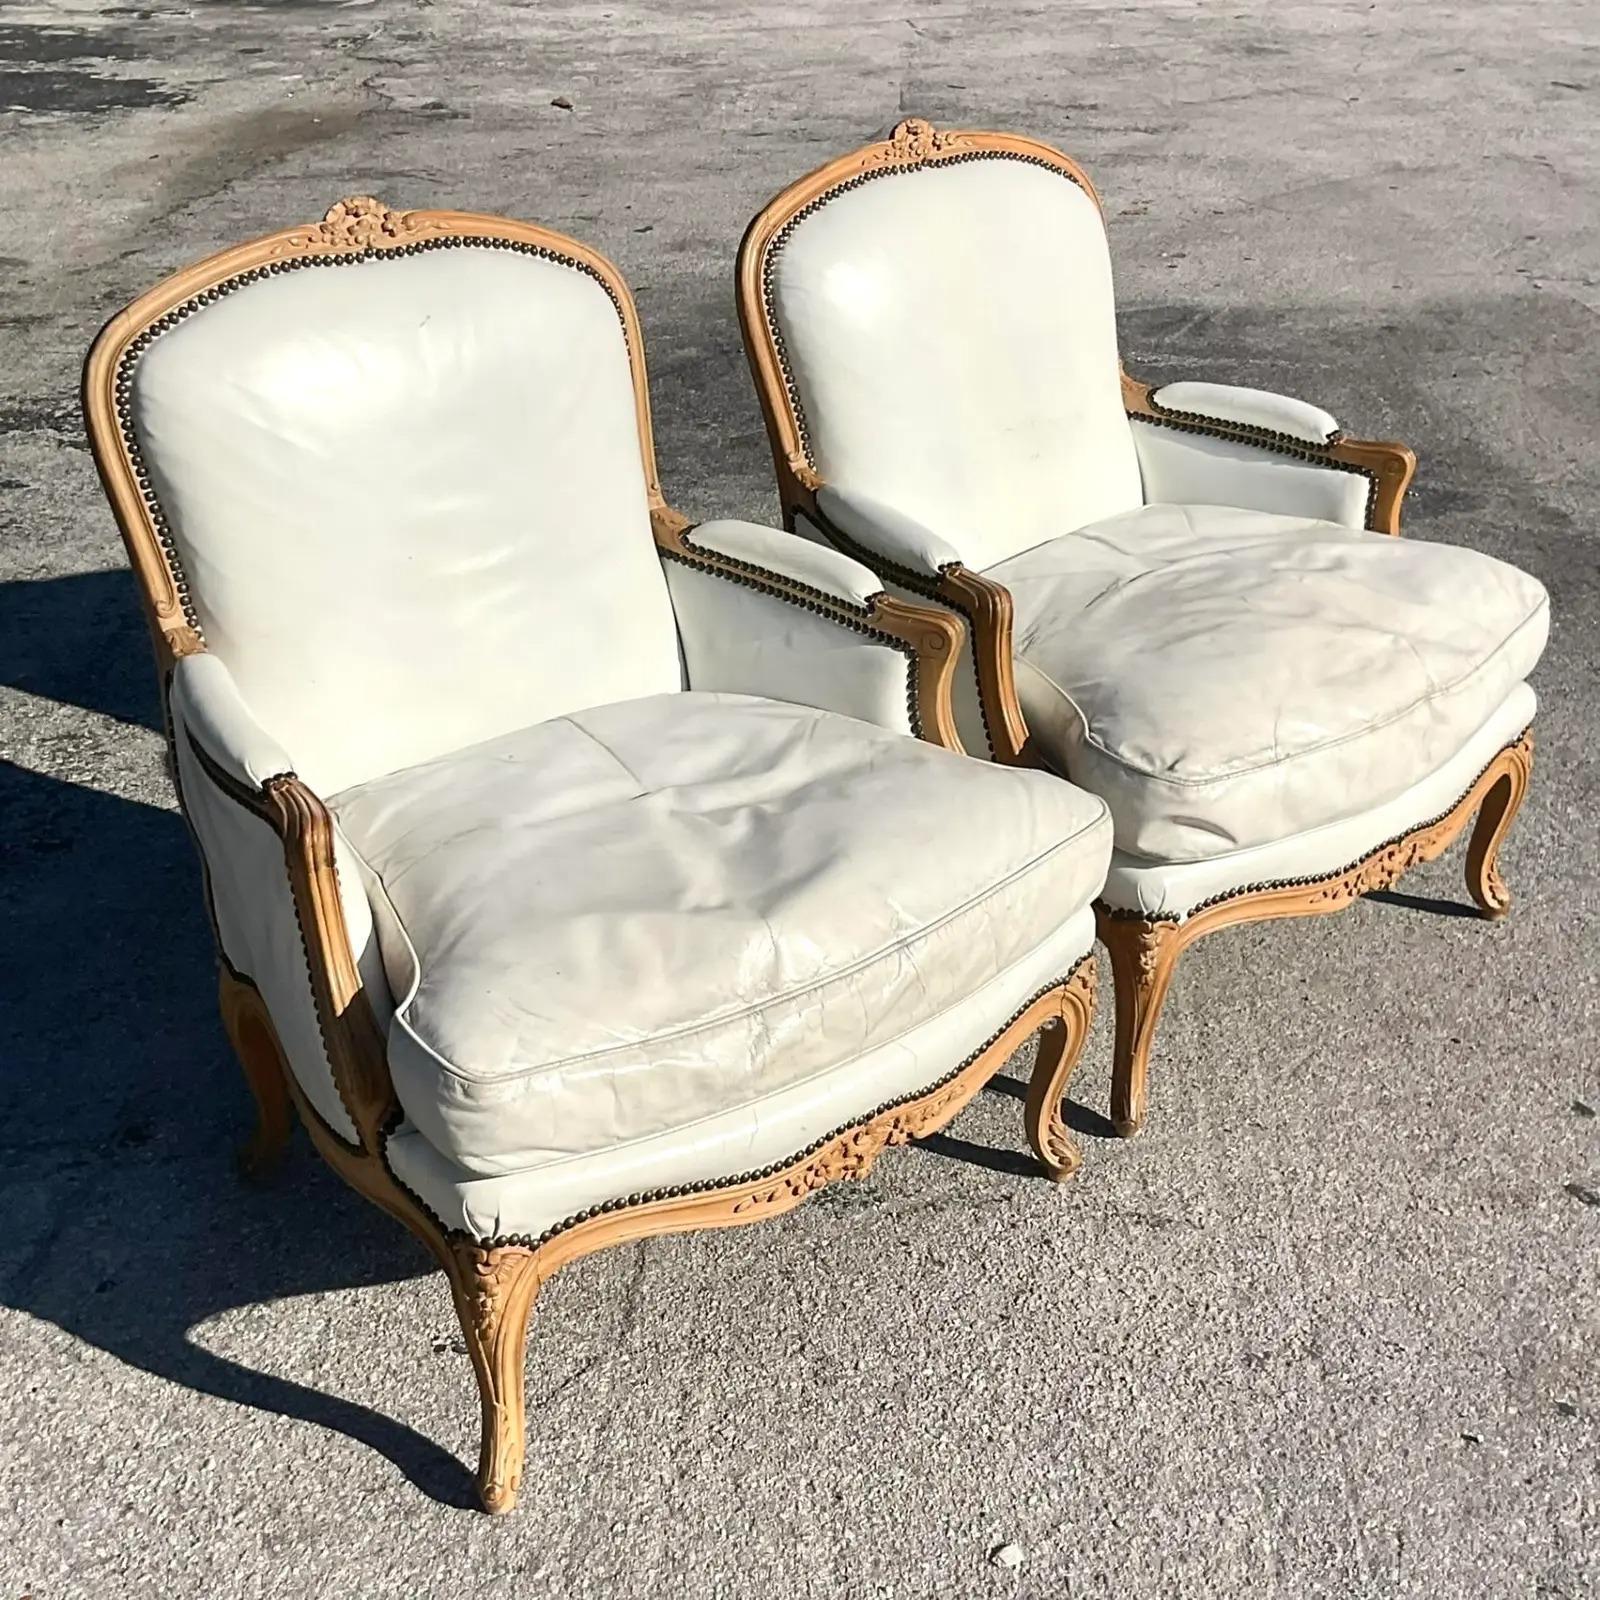 Vintage Boho John Dickinson White Leather Bergere Chairs - a Pair For Sale 1